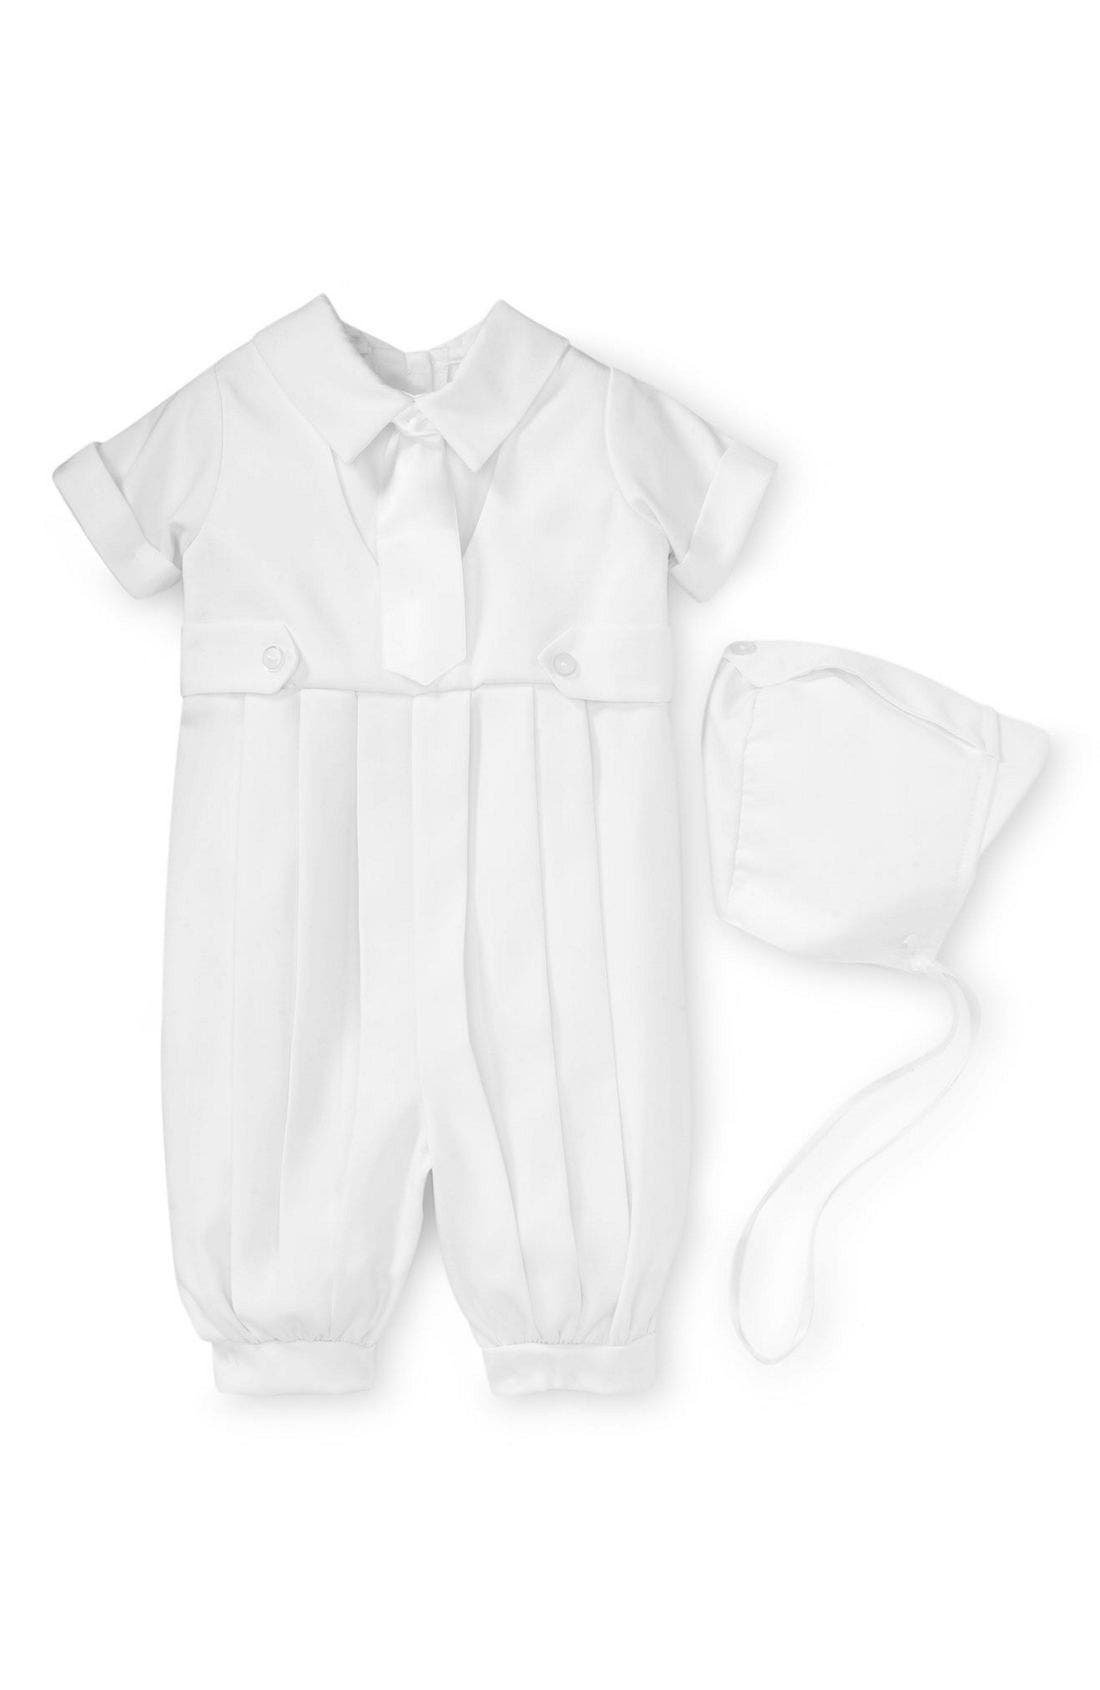 burberry baptism outfit